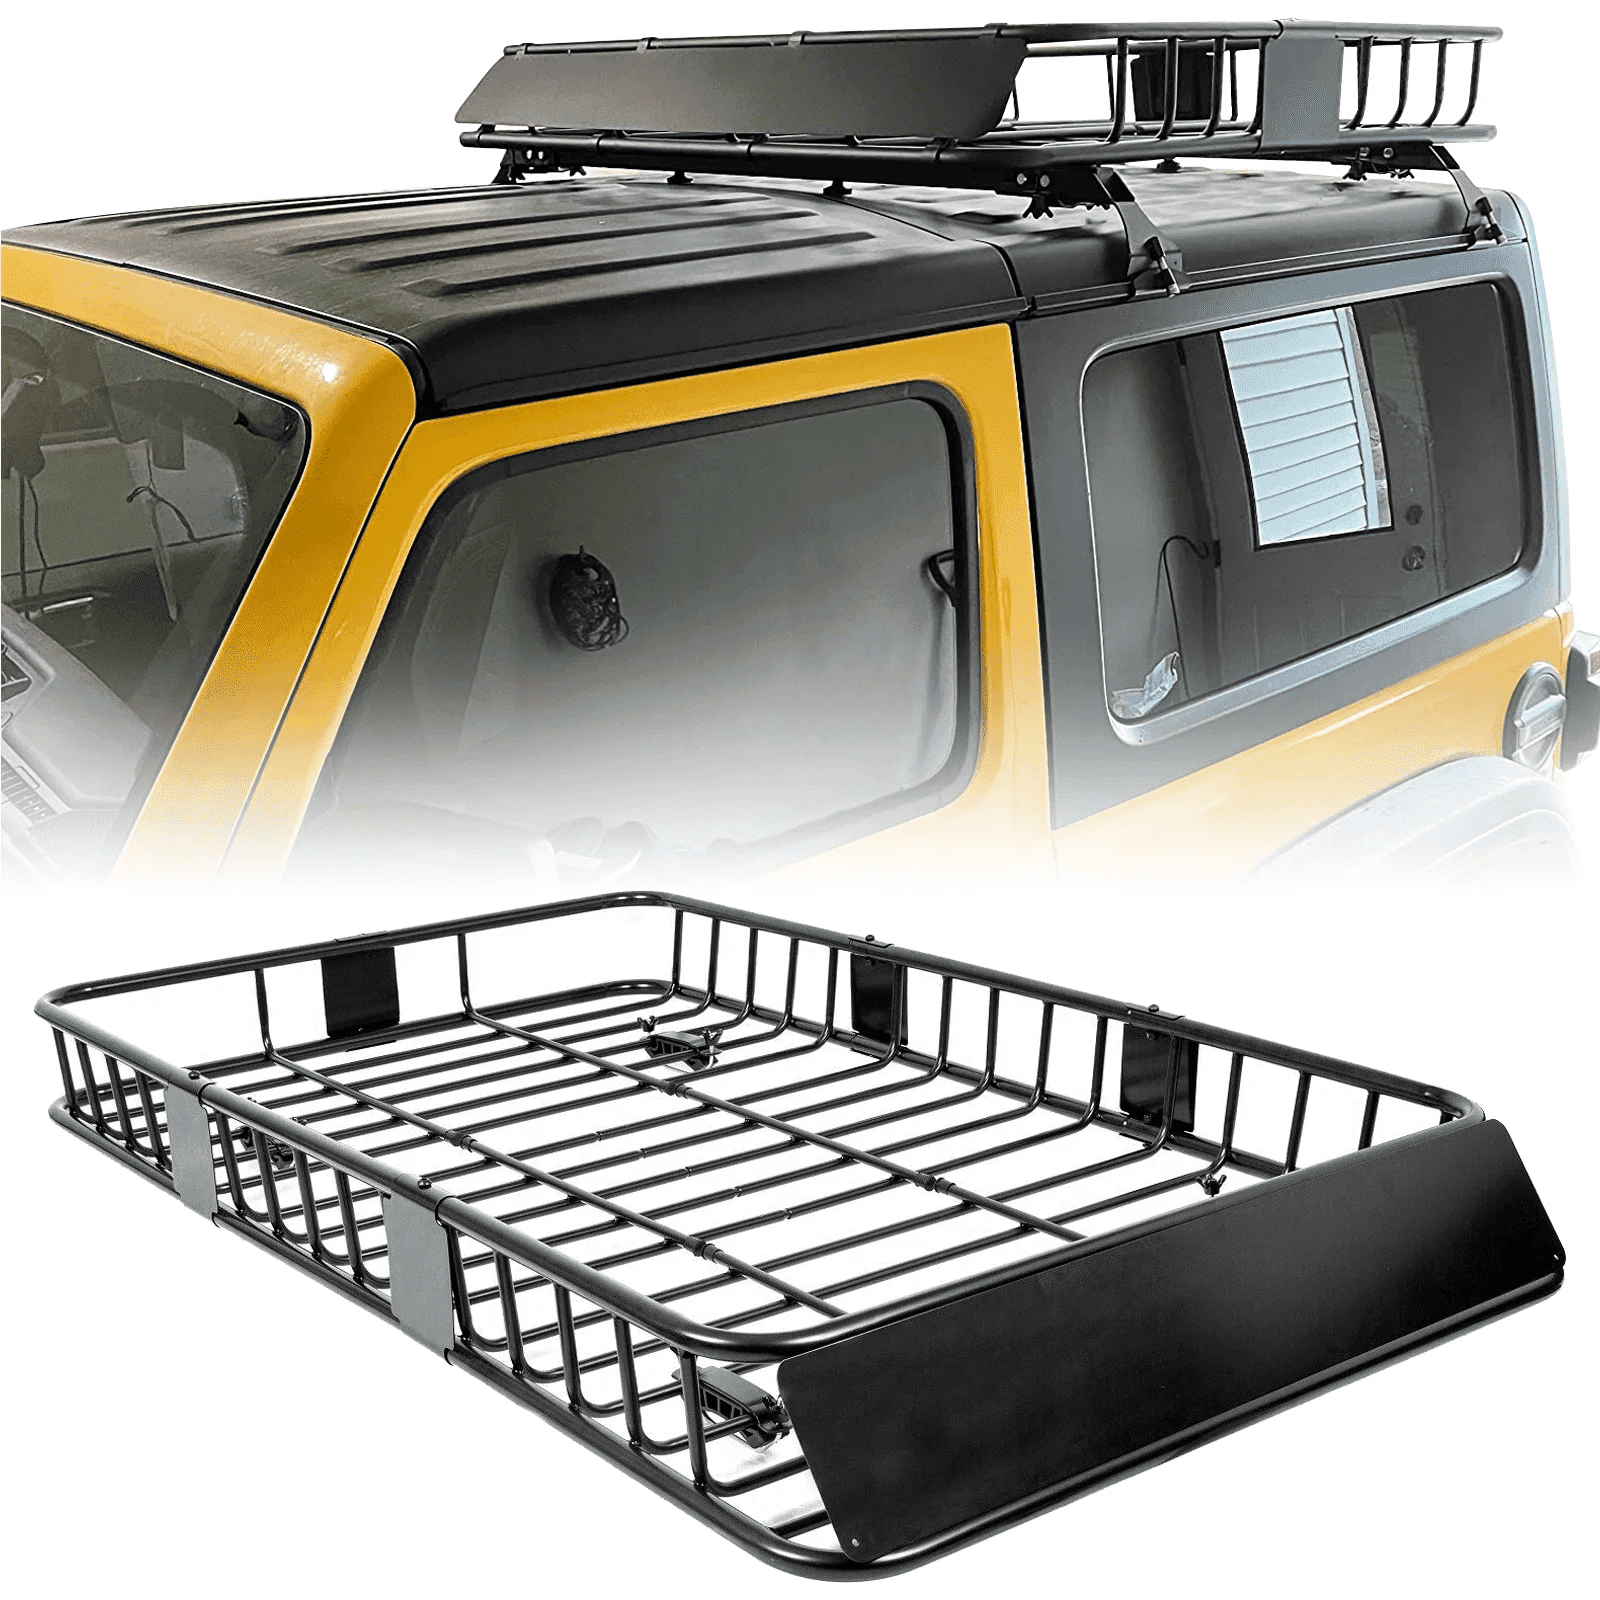 HECASA 64 x 39 x 6'' Universal Roof Rack Cargo Carrier with Extension  250LBS Weight Capacity Heavy Duty Steel Car SUV Top Luggage Storage Holder